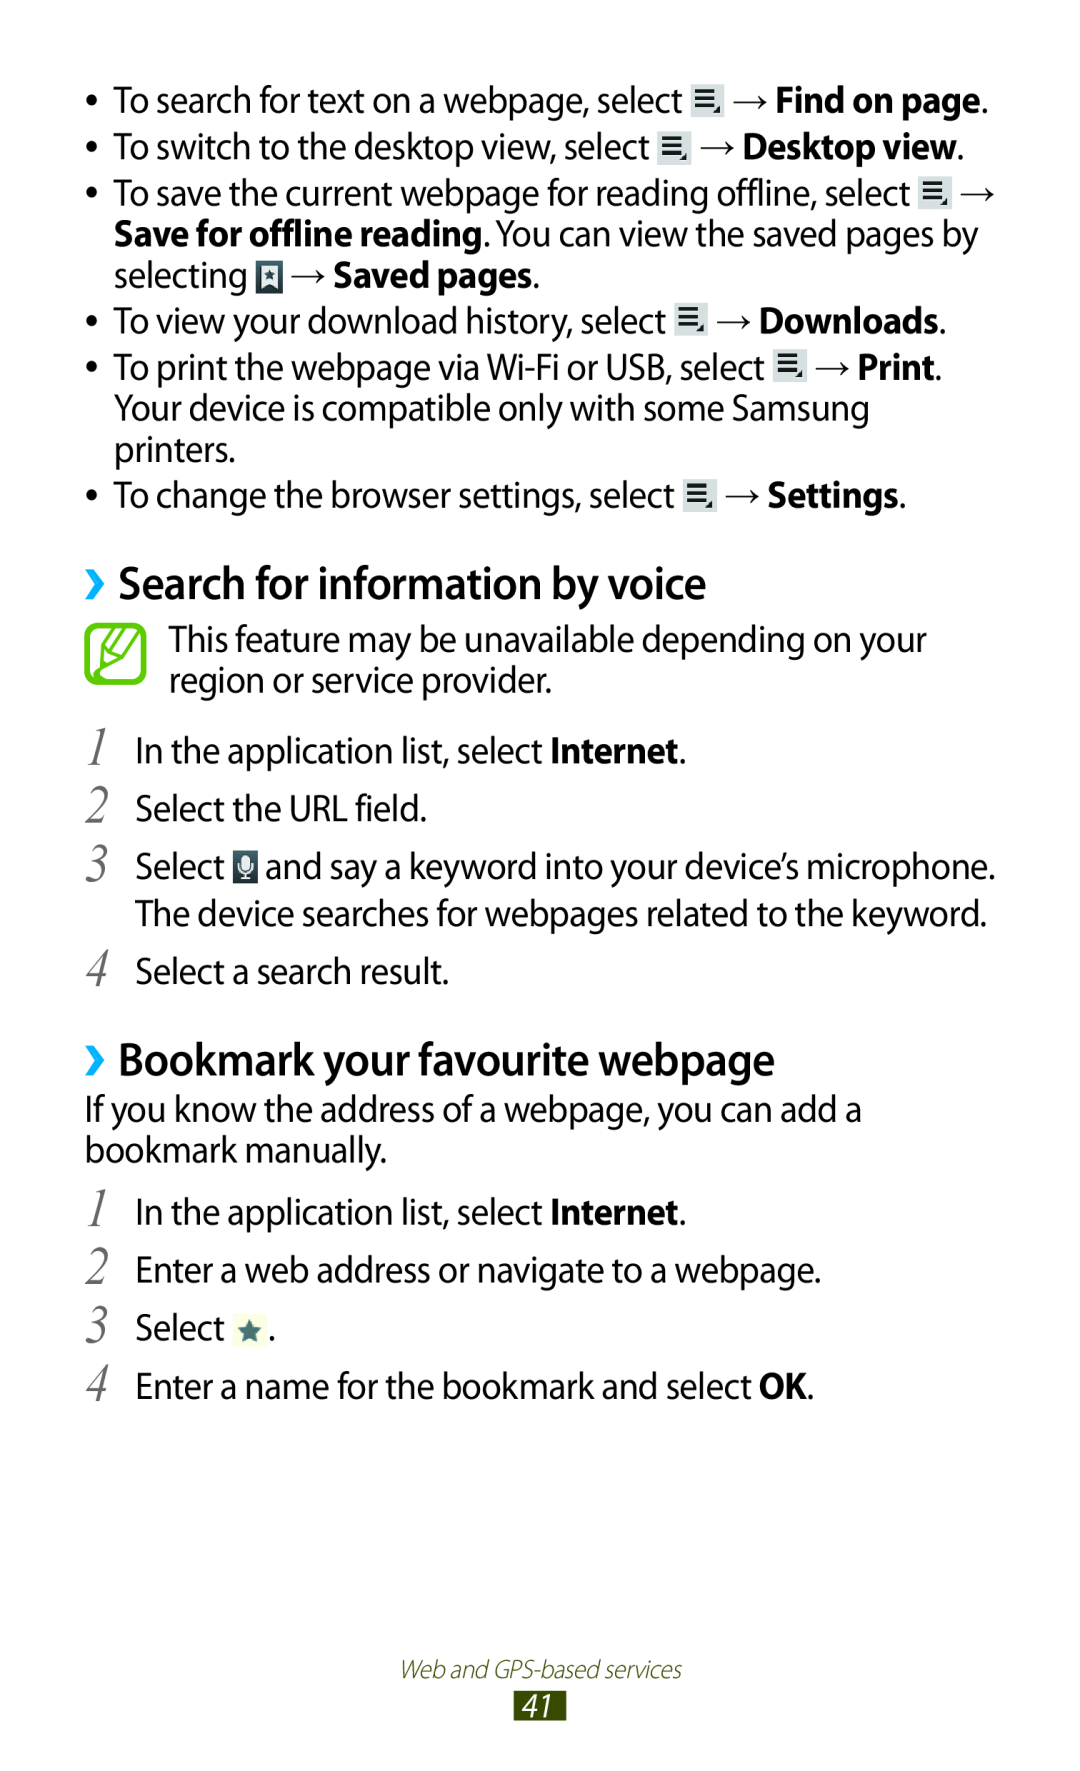 Samsung GT-P7500FKDXEC manual ››Search for information by voice, ››Bookmark your favourite webpage, → Desktop view 